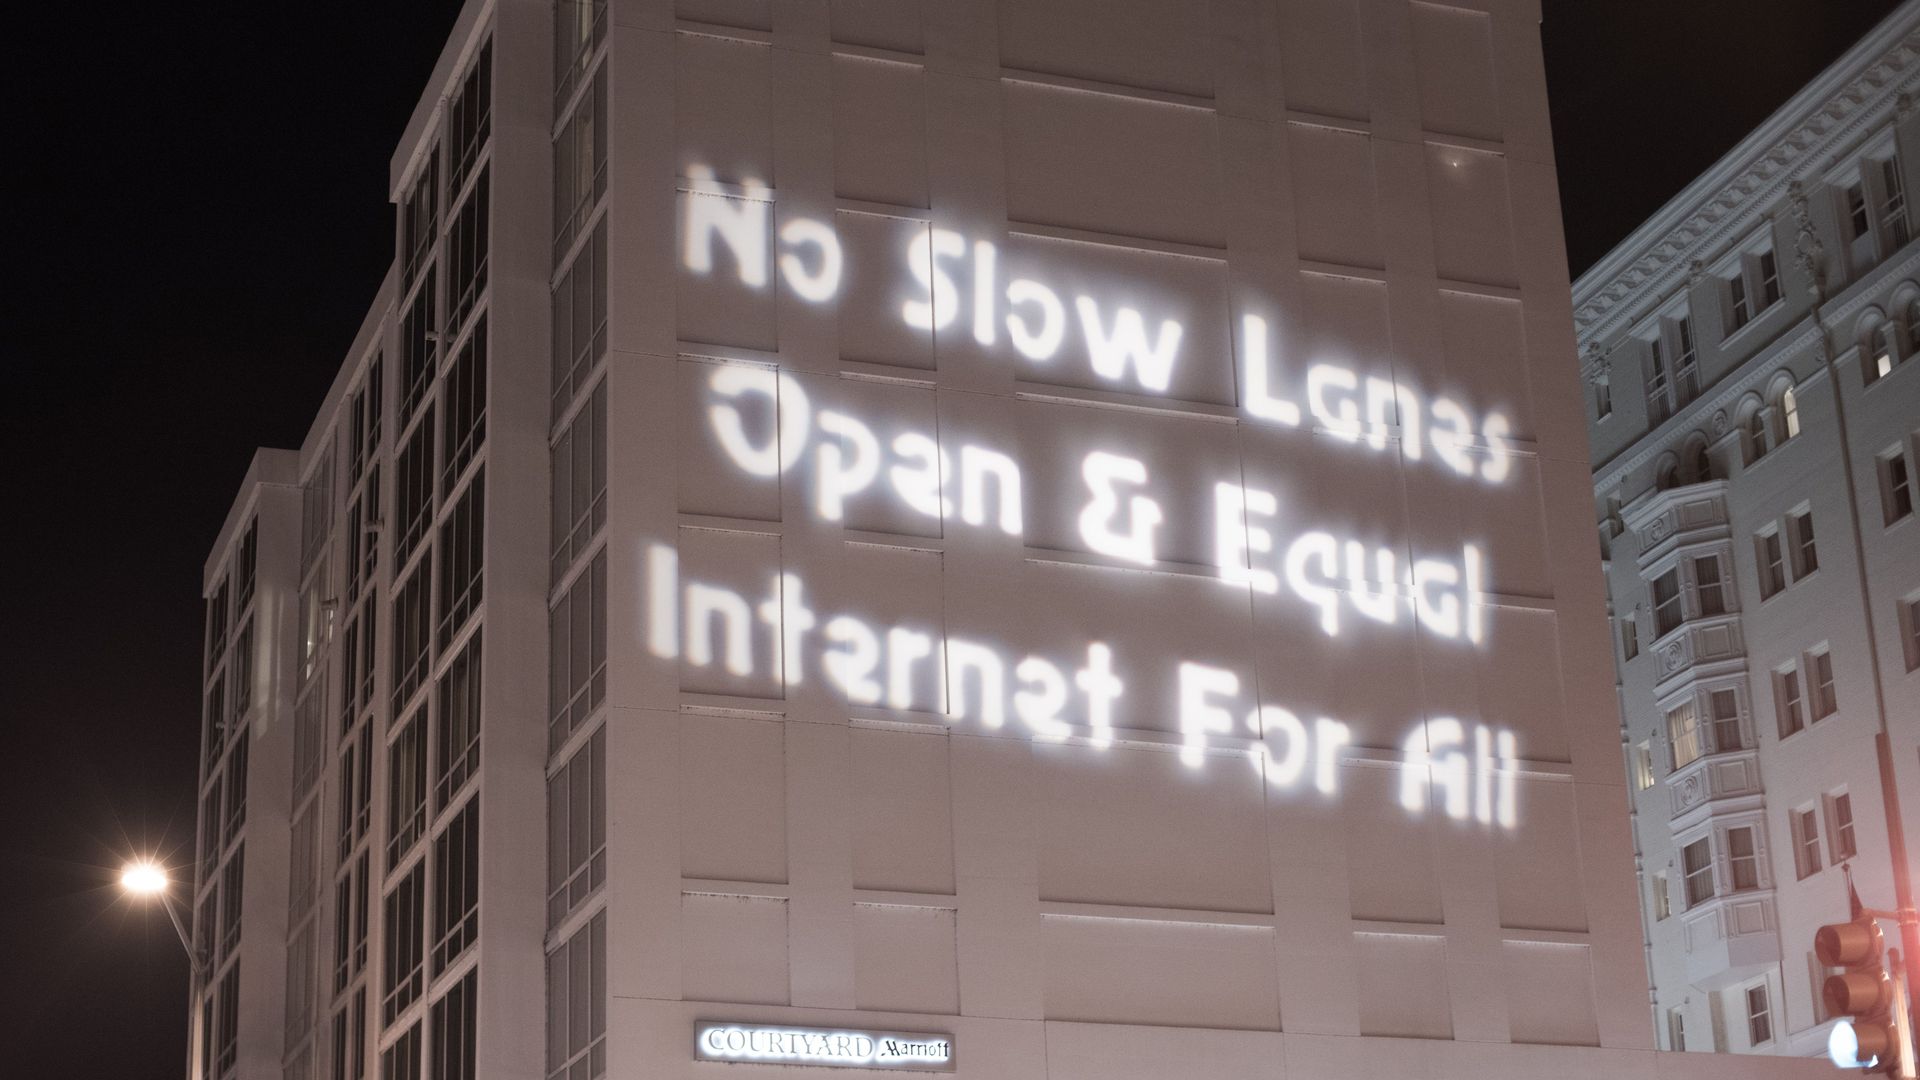 The words "No Slow Lanes Open & Equal Internet For All" projected in white on the side of a building at night